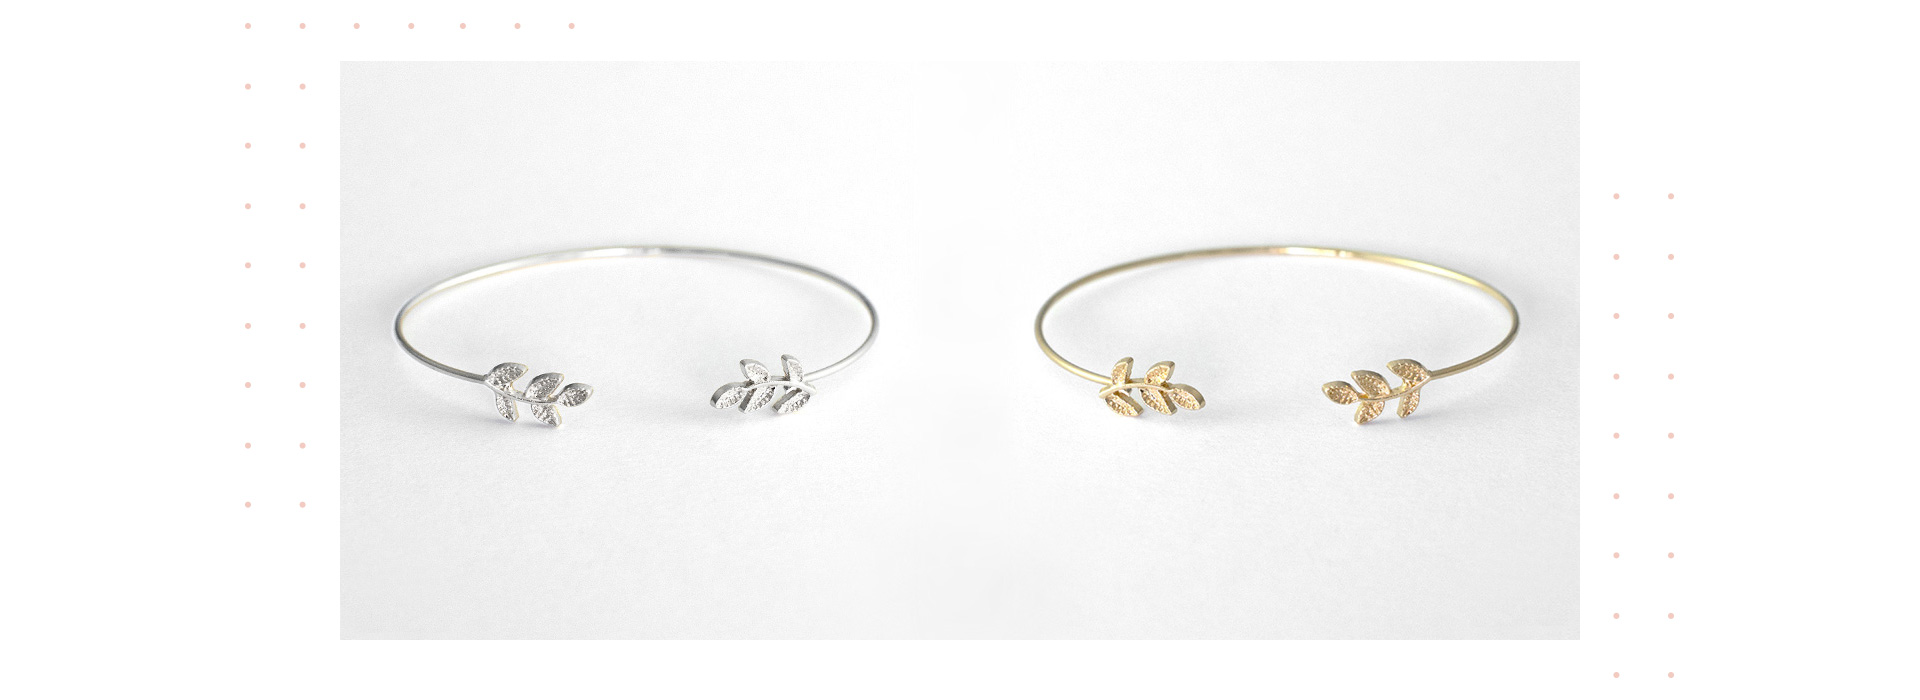 silver and gold bracelets with leaf